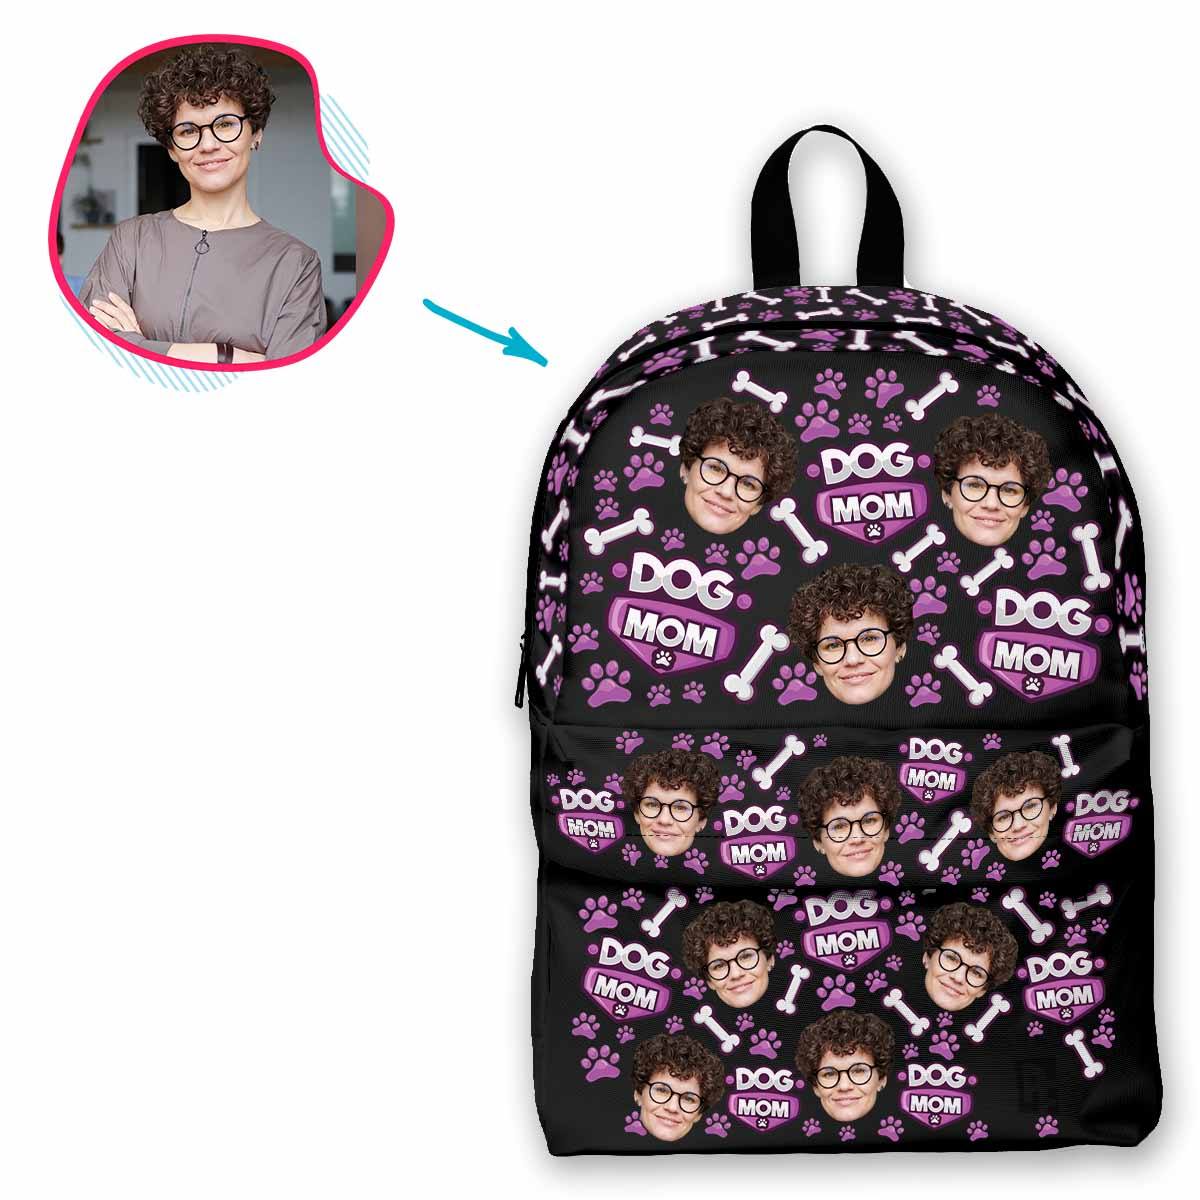 dark Dog Mom classic backpack personalized with photo of face printed on it